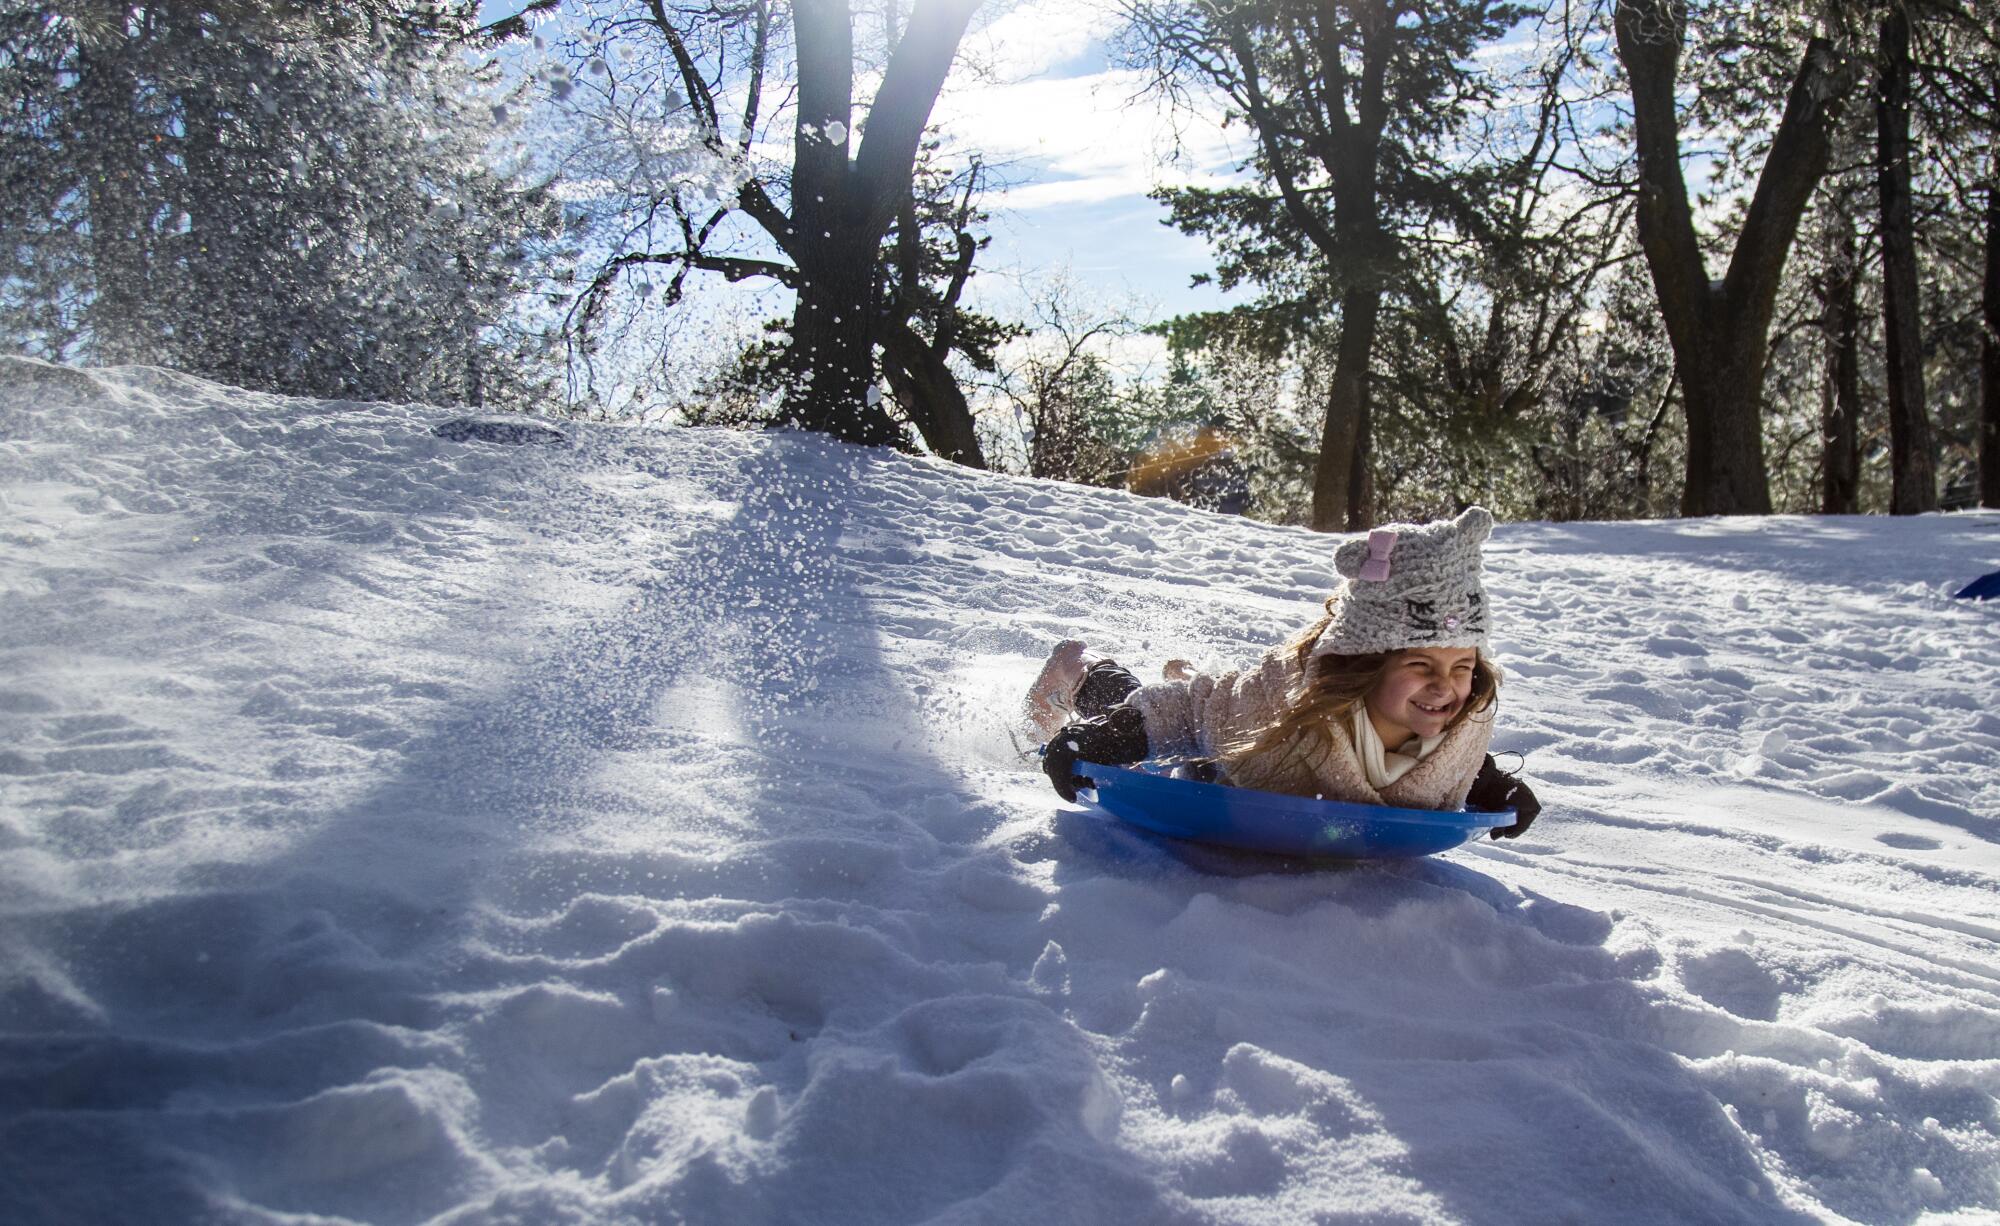 A girl smiles as she slides down a snowy slope